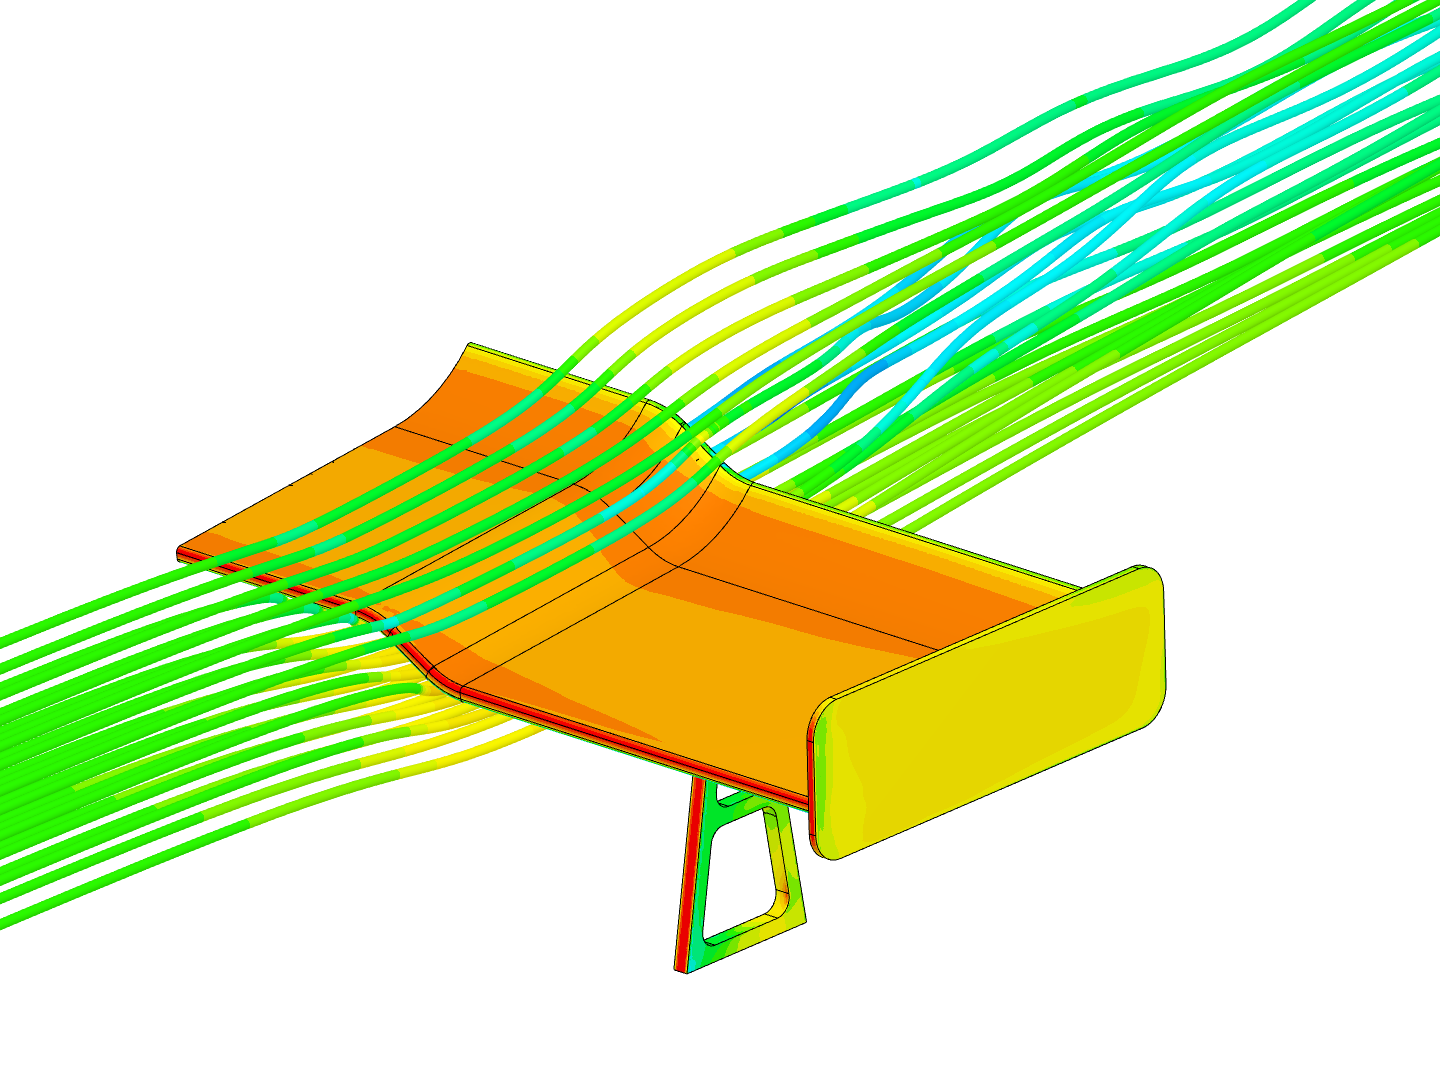 cfd on a spoiler image